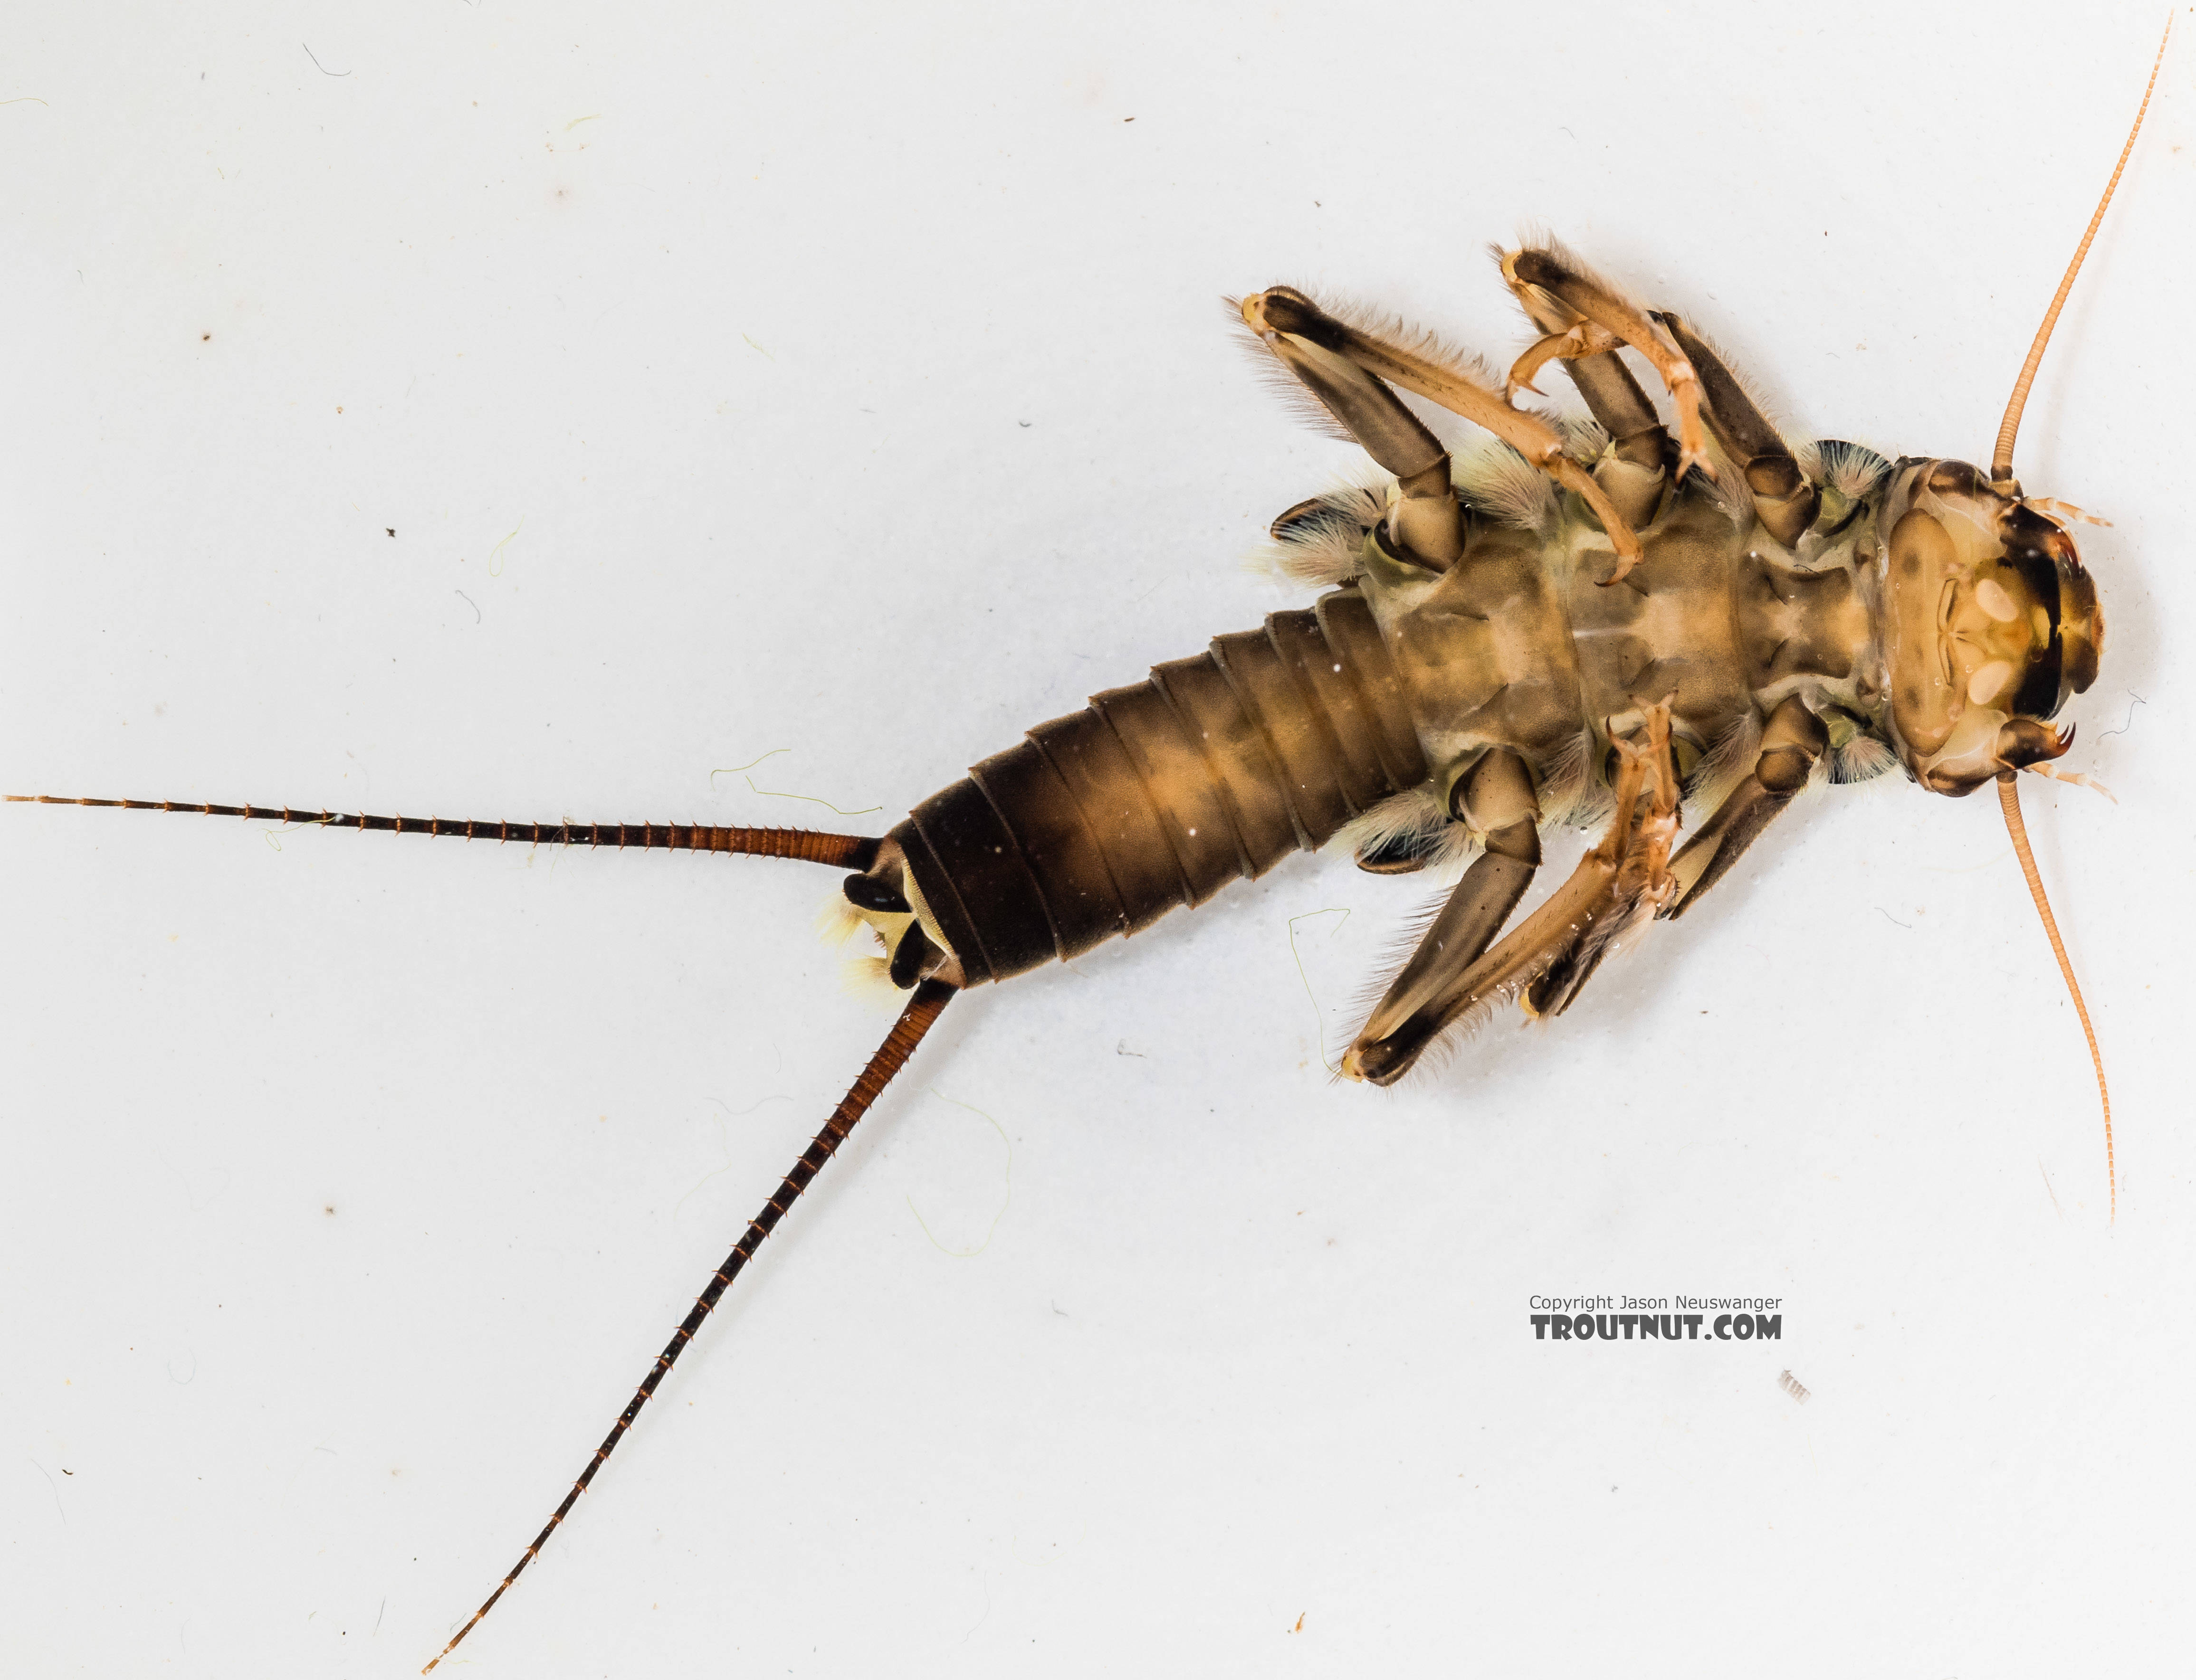 Hesperoperla pacifica (Golden Stone) Stonefly Nymph from the South Fork Snoqualmie River in Washington